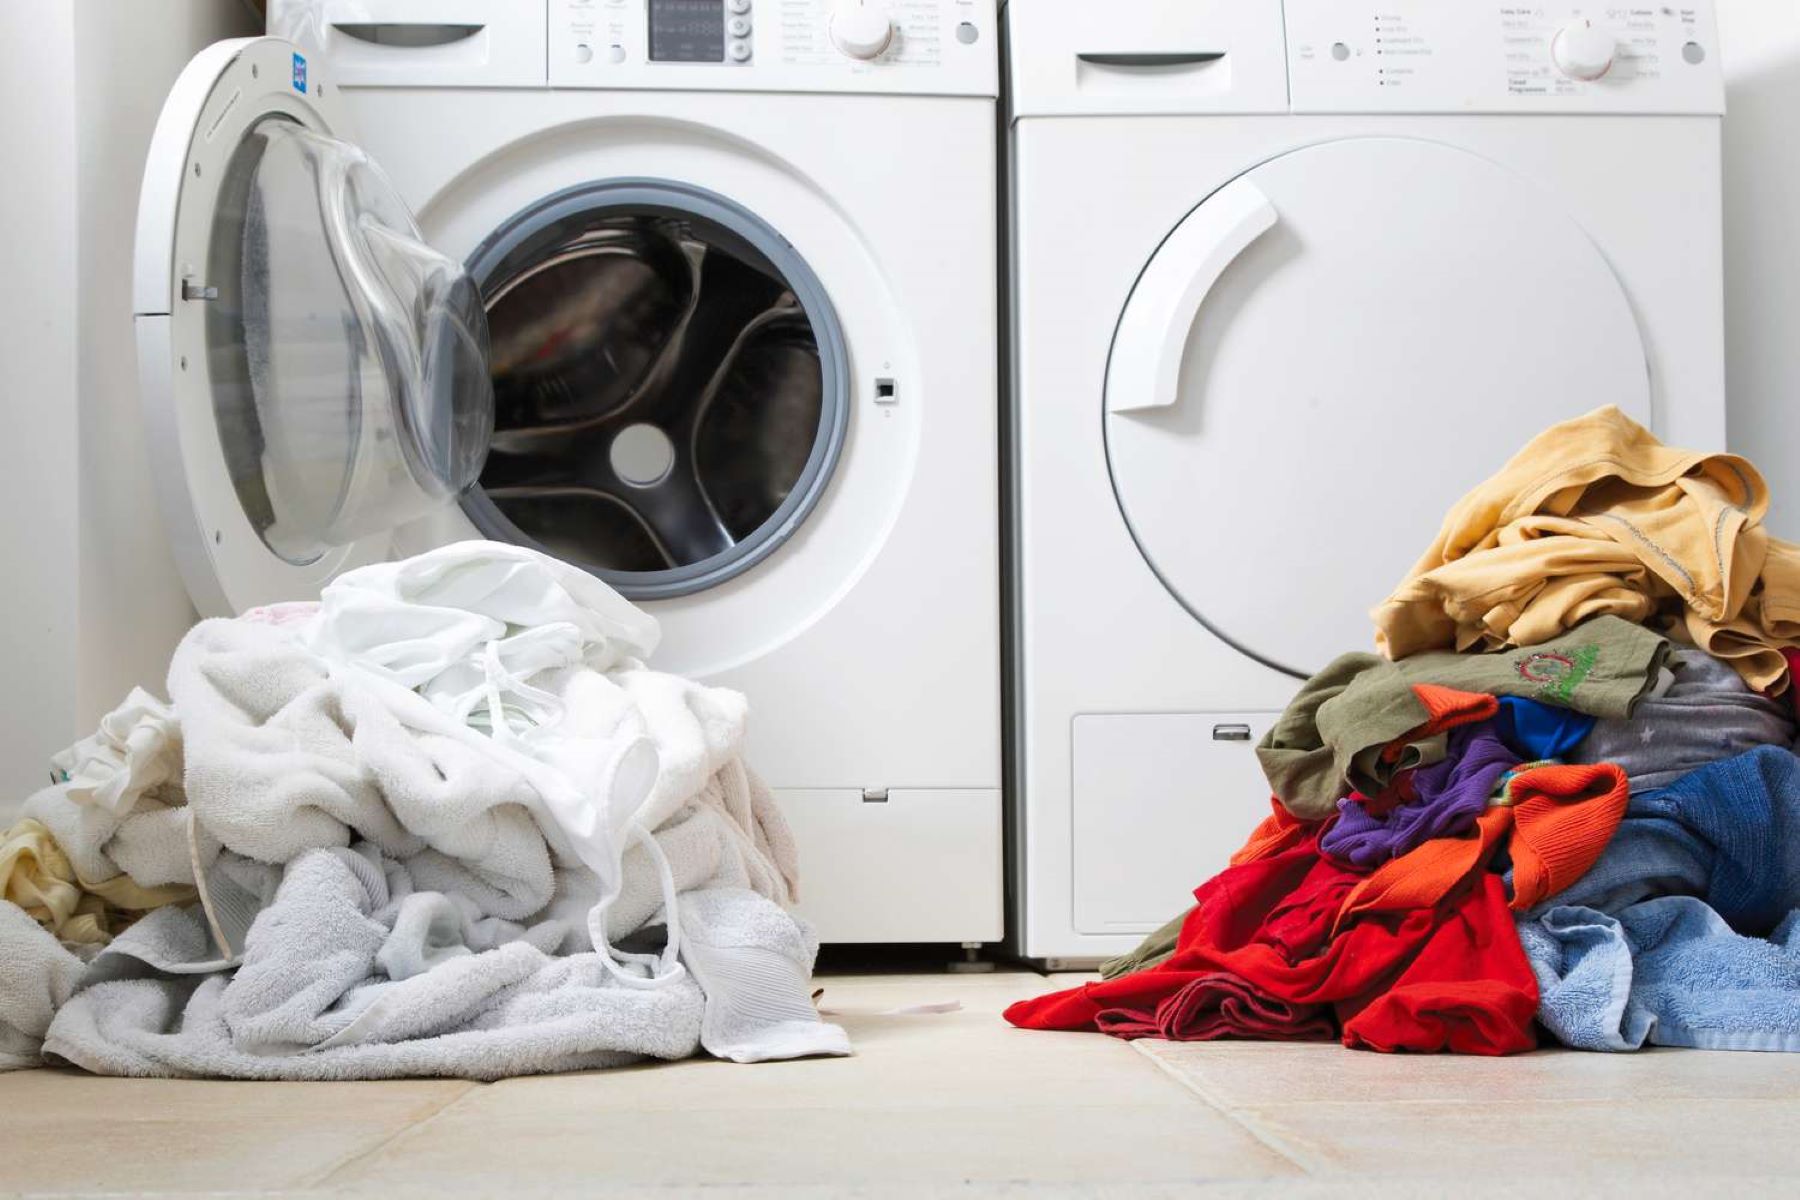 15-laundry-facts